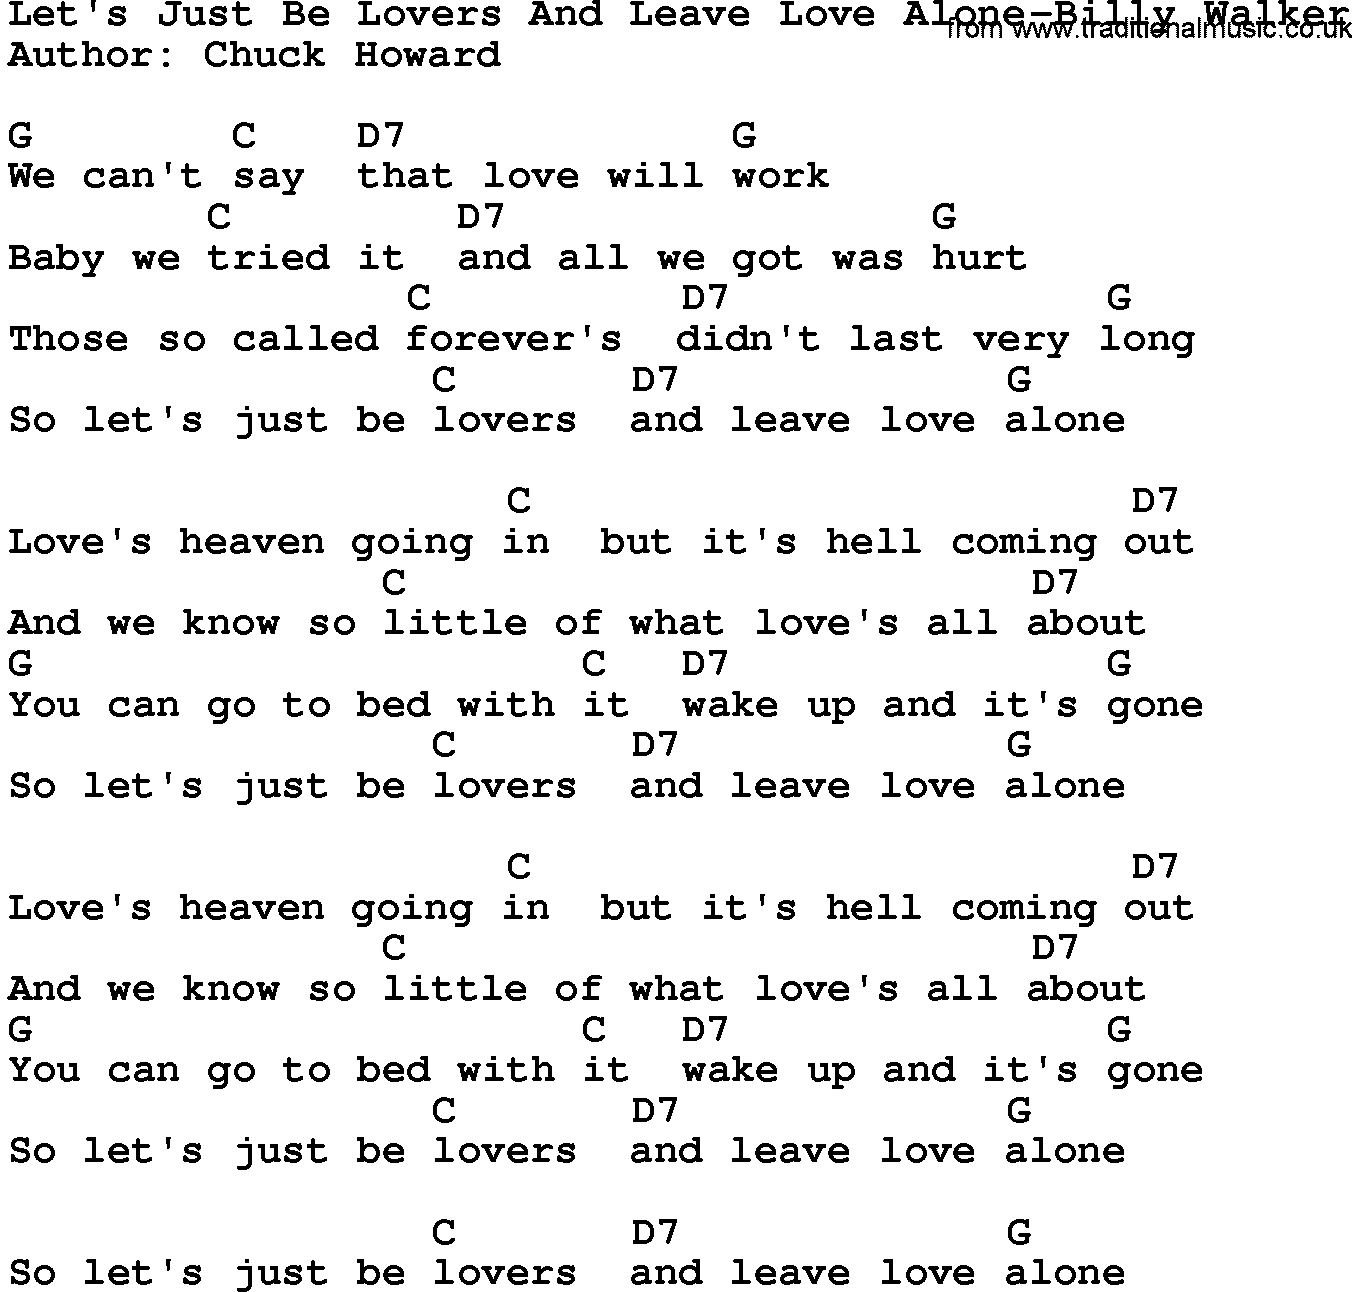 Country music song: Let's Just Be Lovers And Leave Love Alone-Billy Walker lyrics and chords